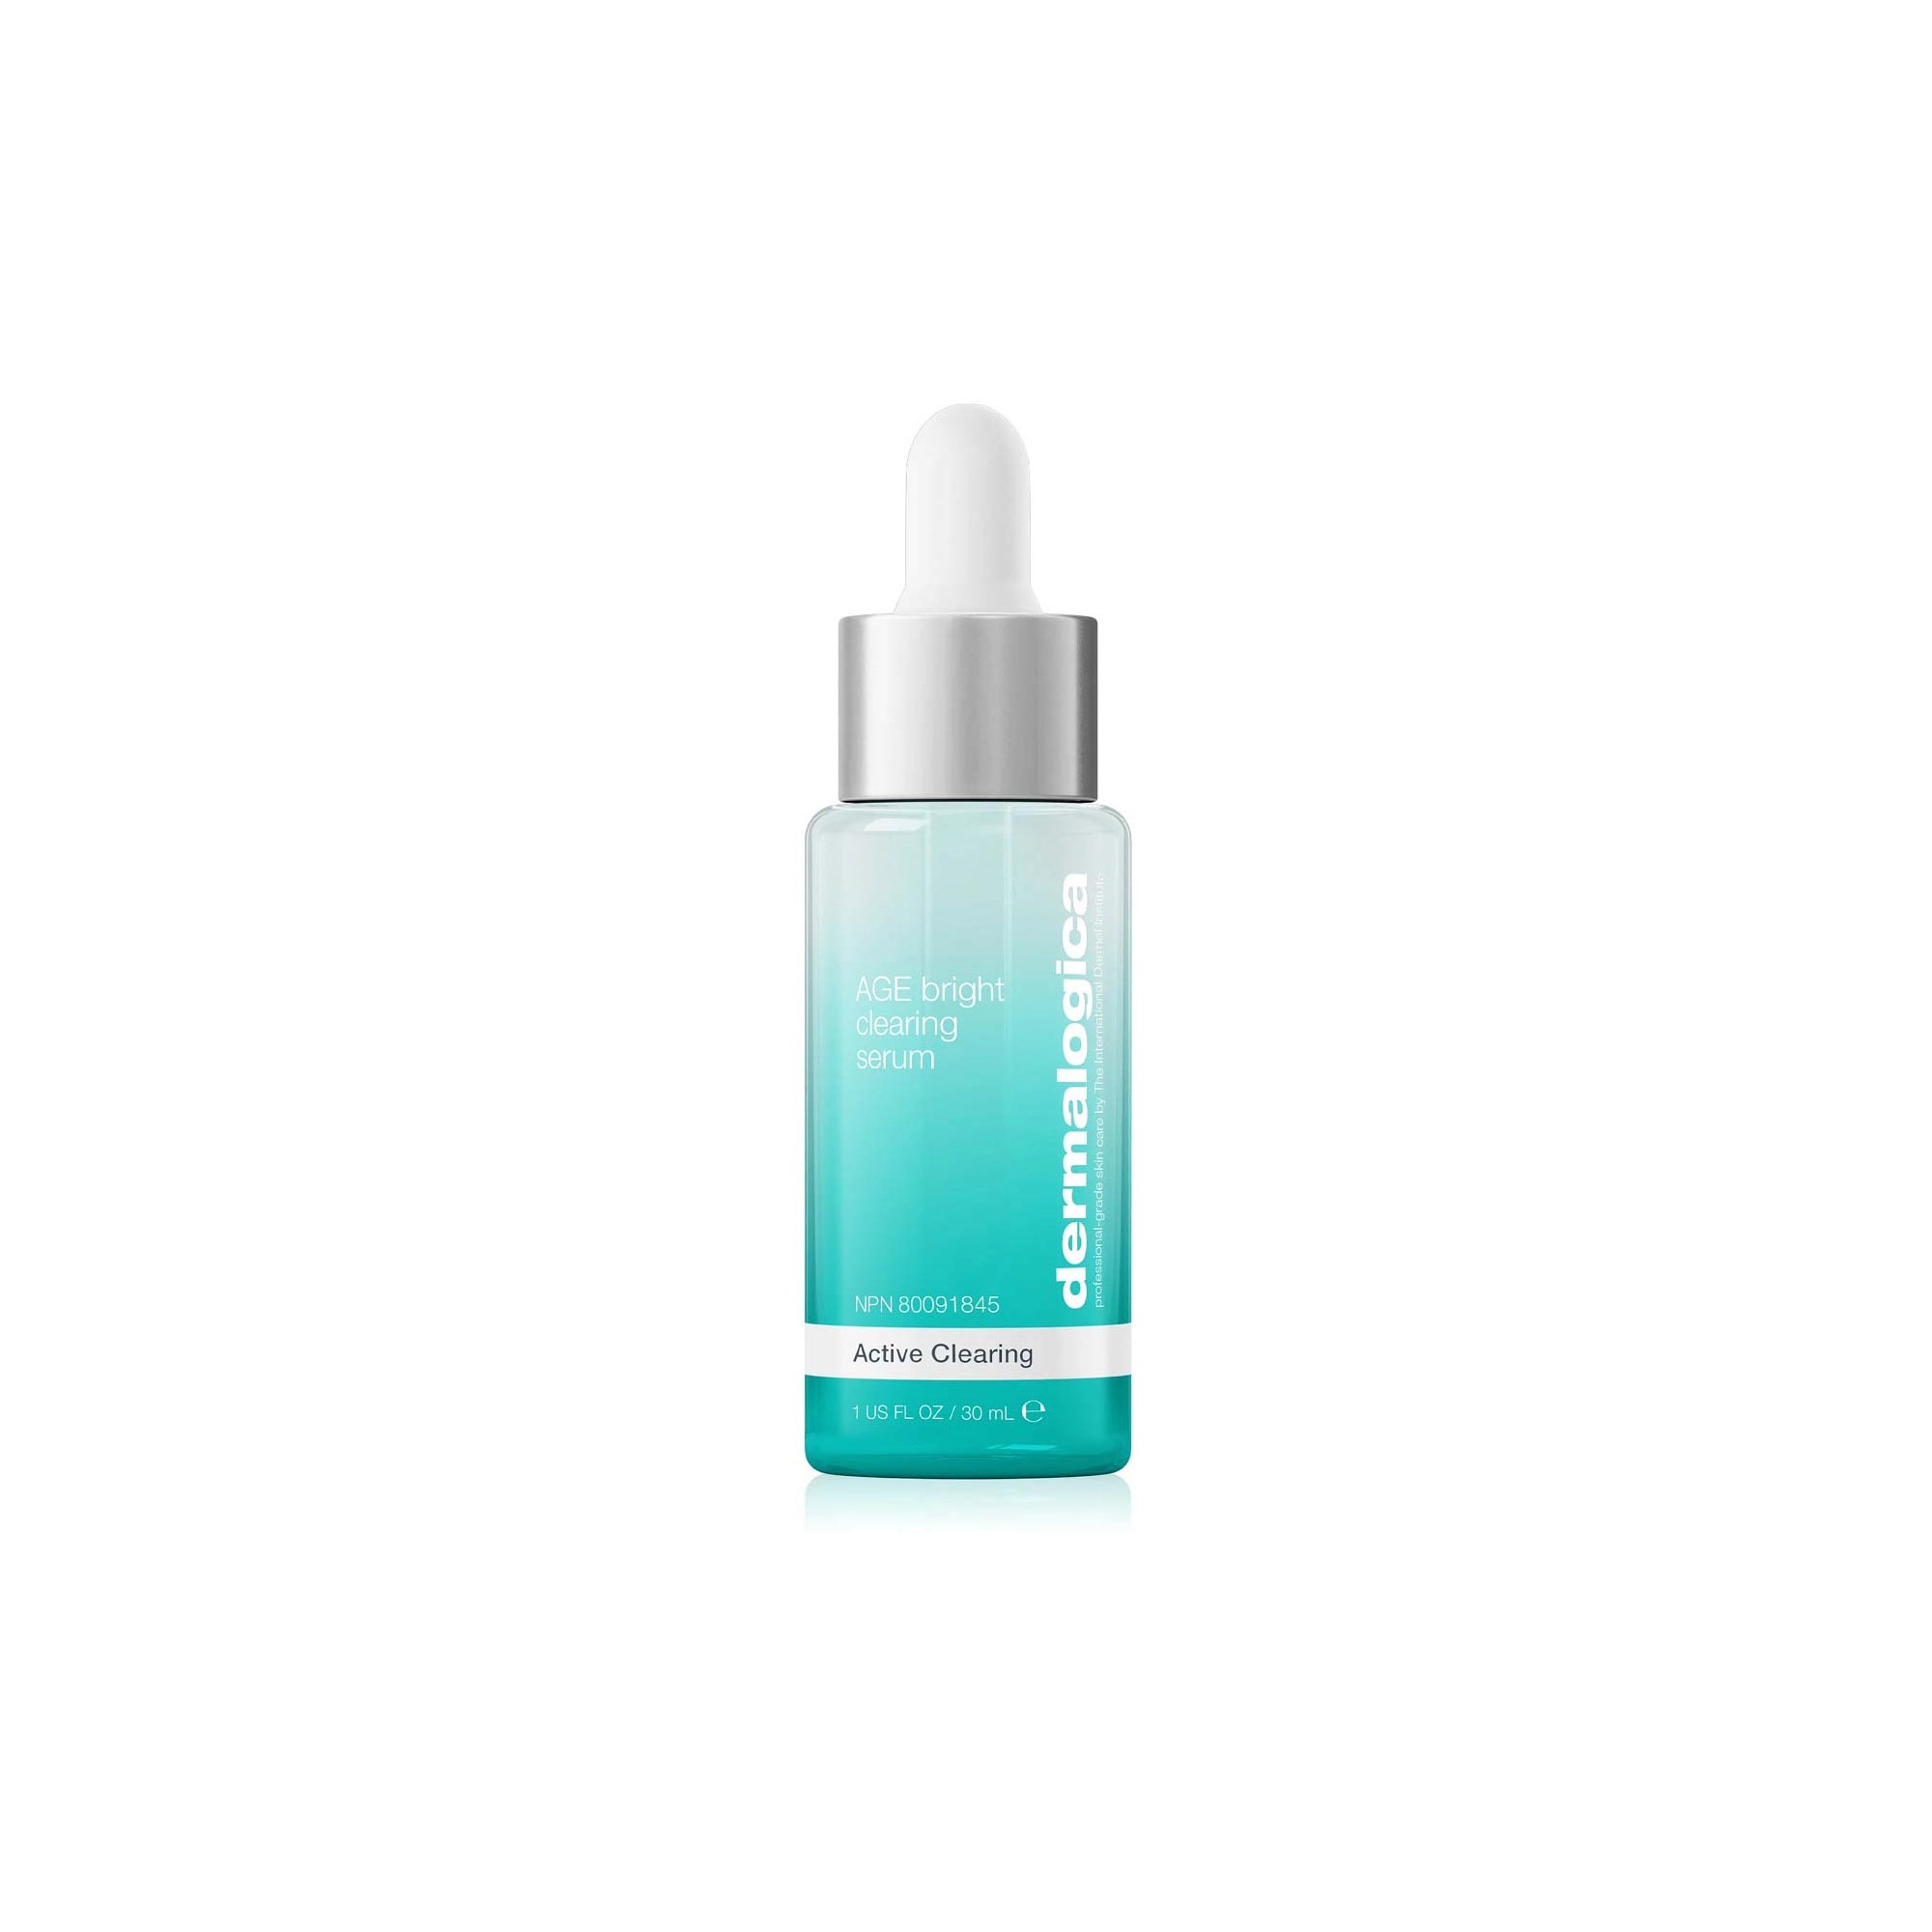 Läs mer om Dermalogica Active Clearing AGE Bright Clearing Serum 30 ml